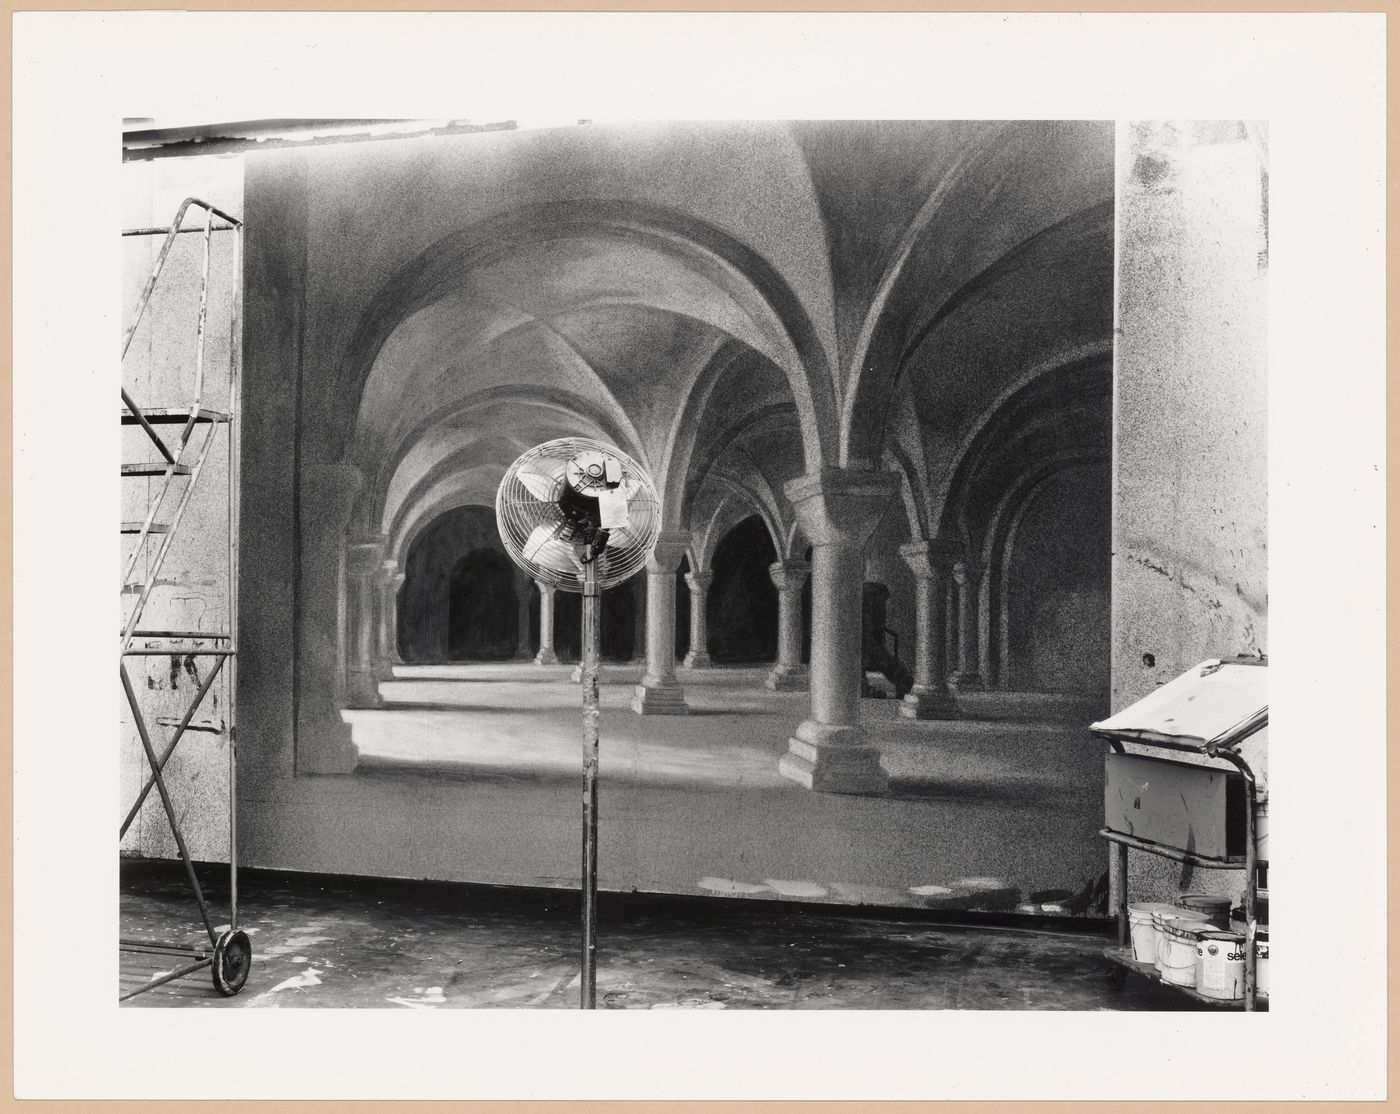 Stages: Canadian Broadcasting Corporation set construction building (interior), Toronto, Ontario